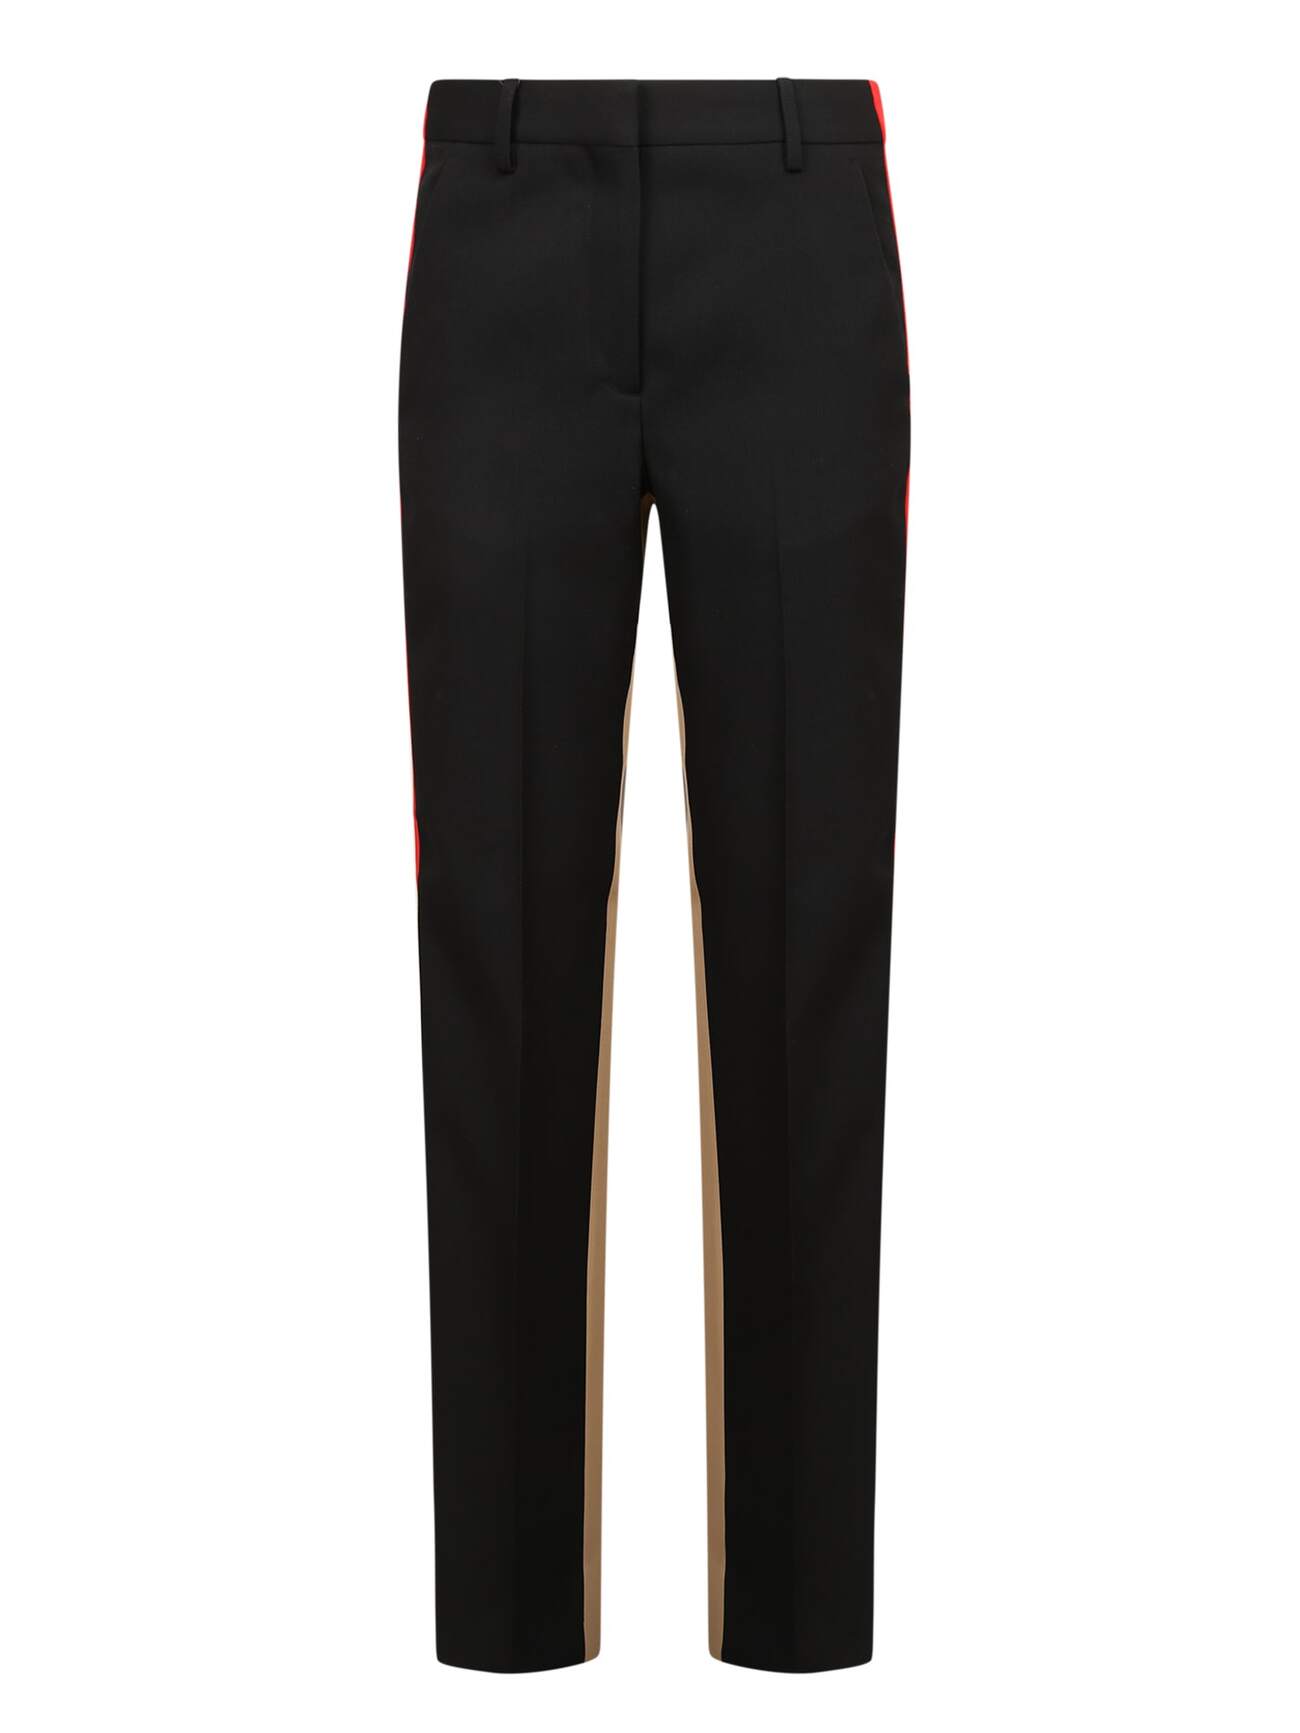 Burberry Wool Trousers in black